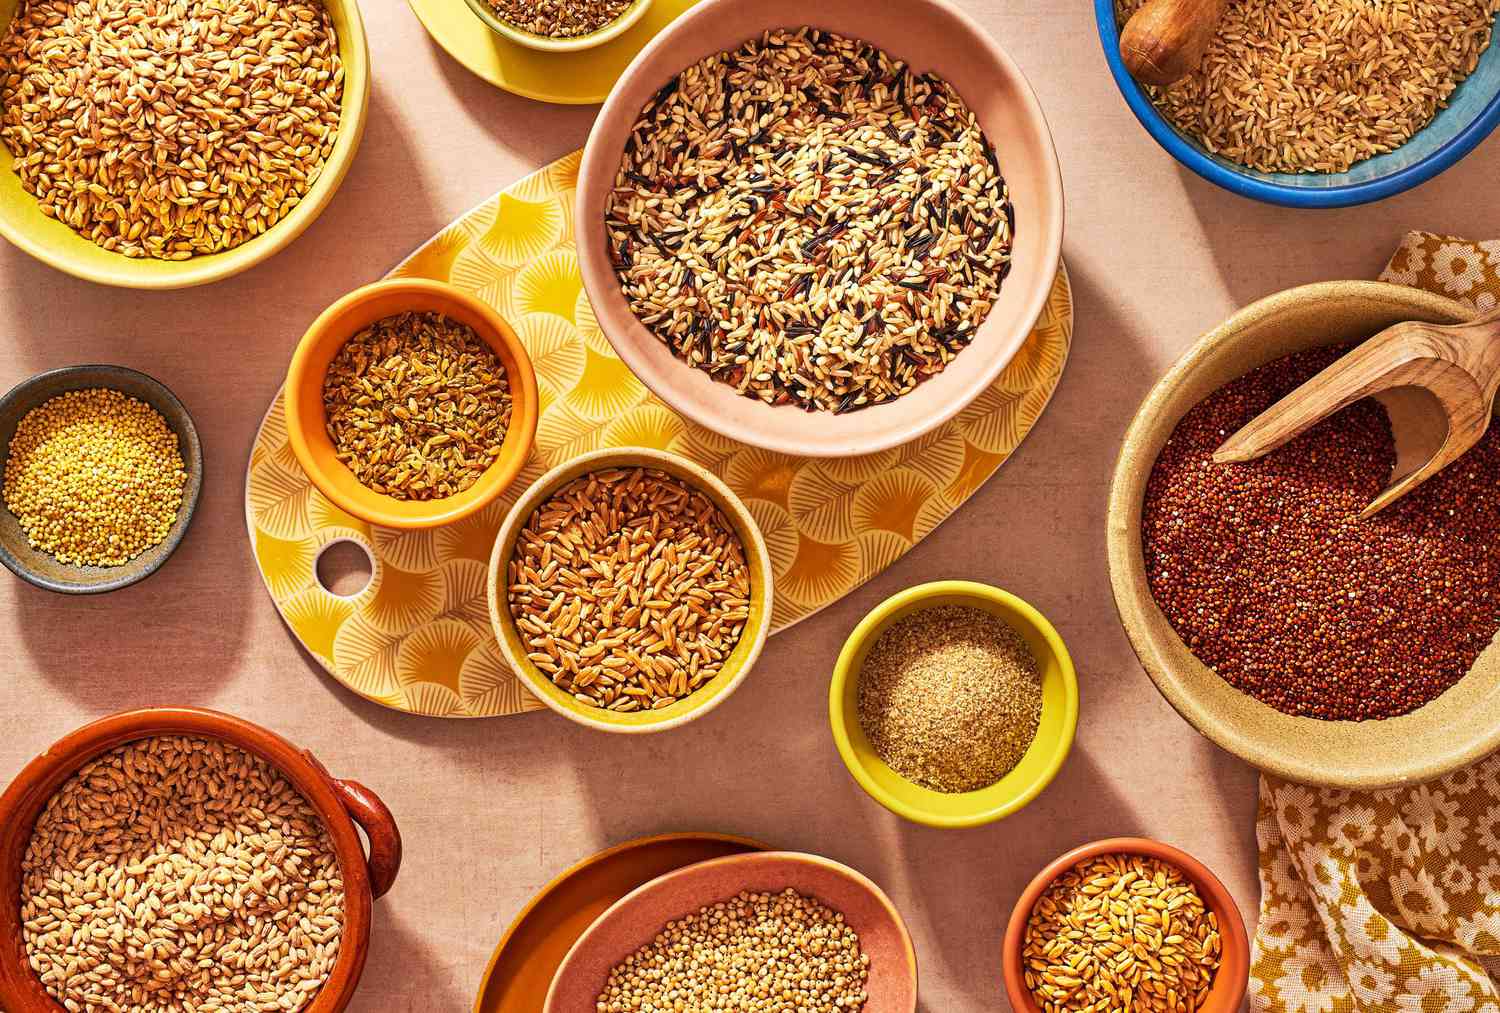 whole grains not to have after colonoscopy